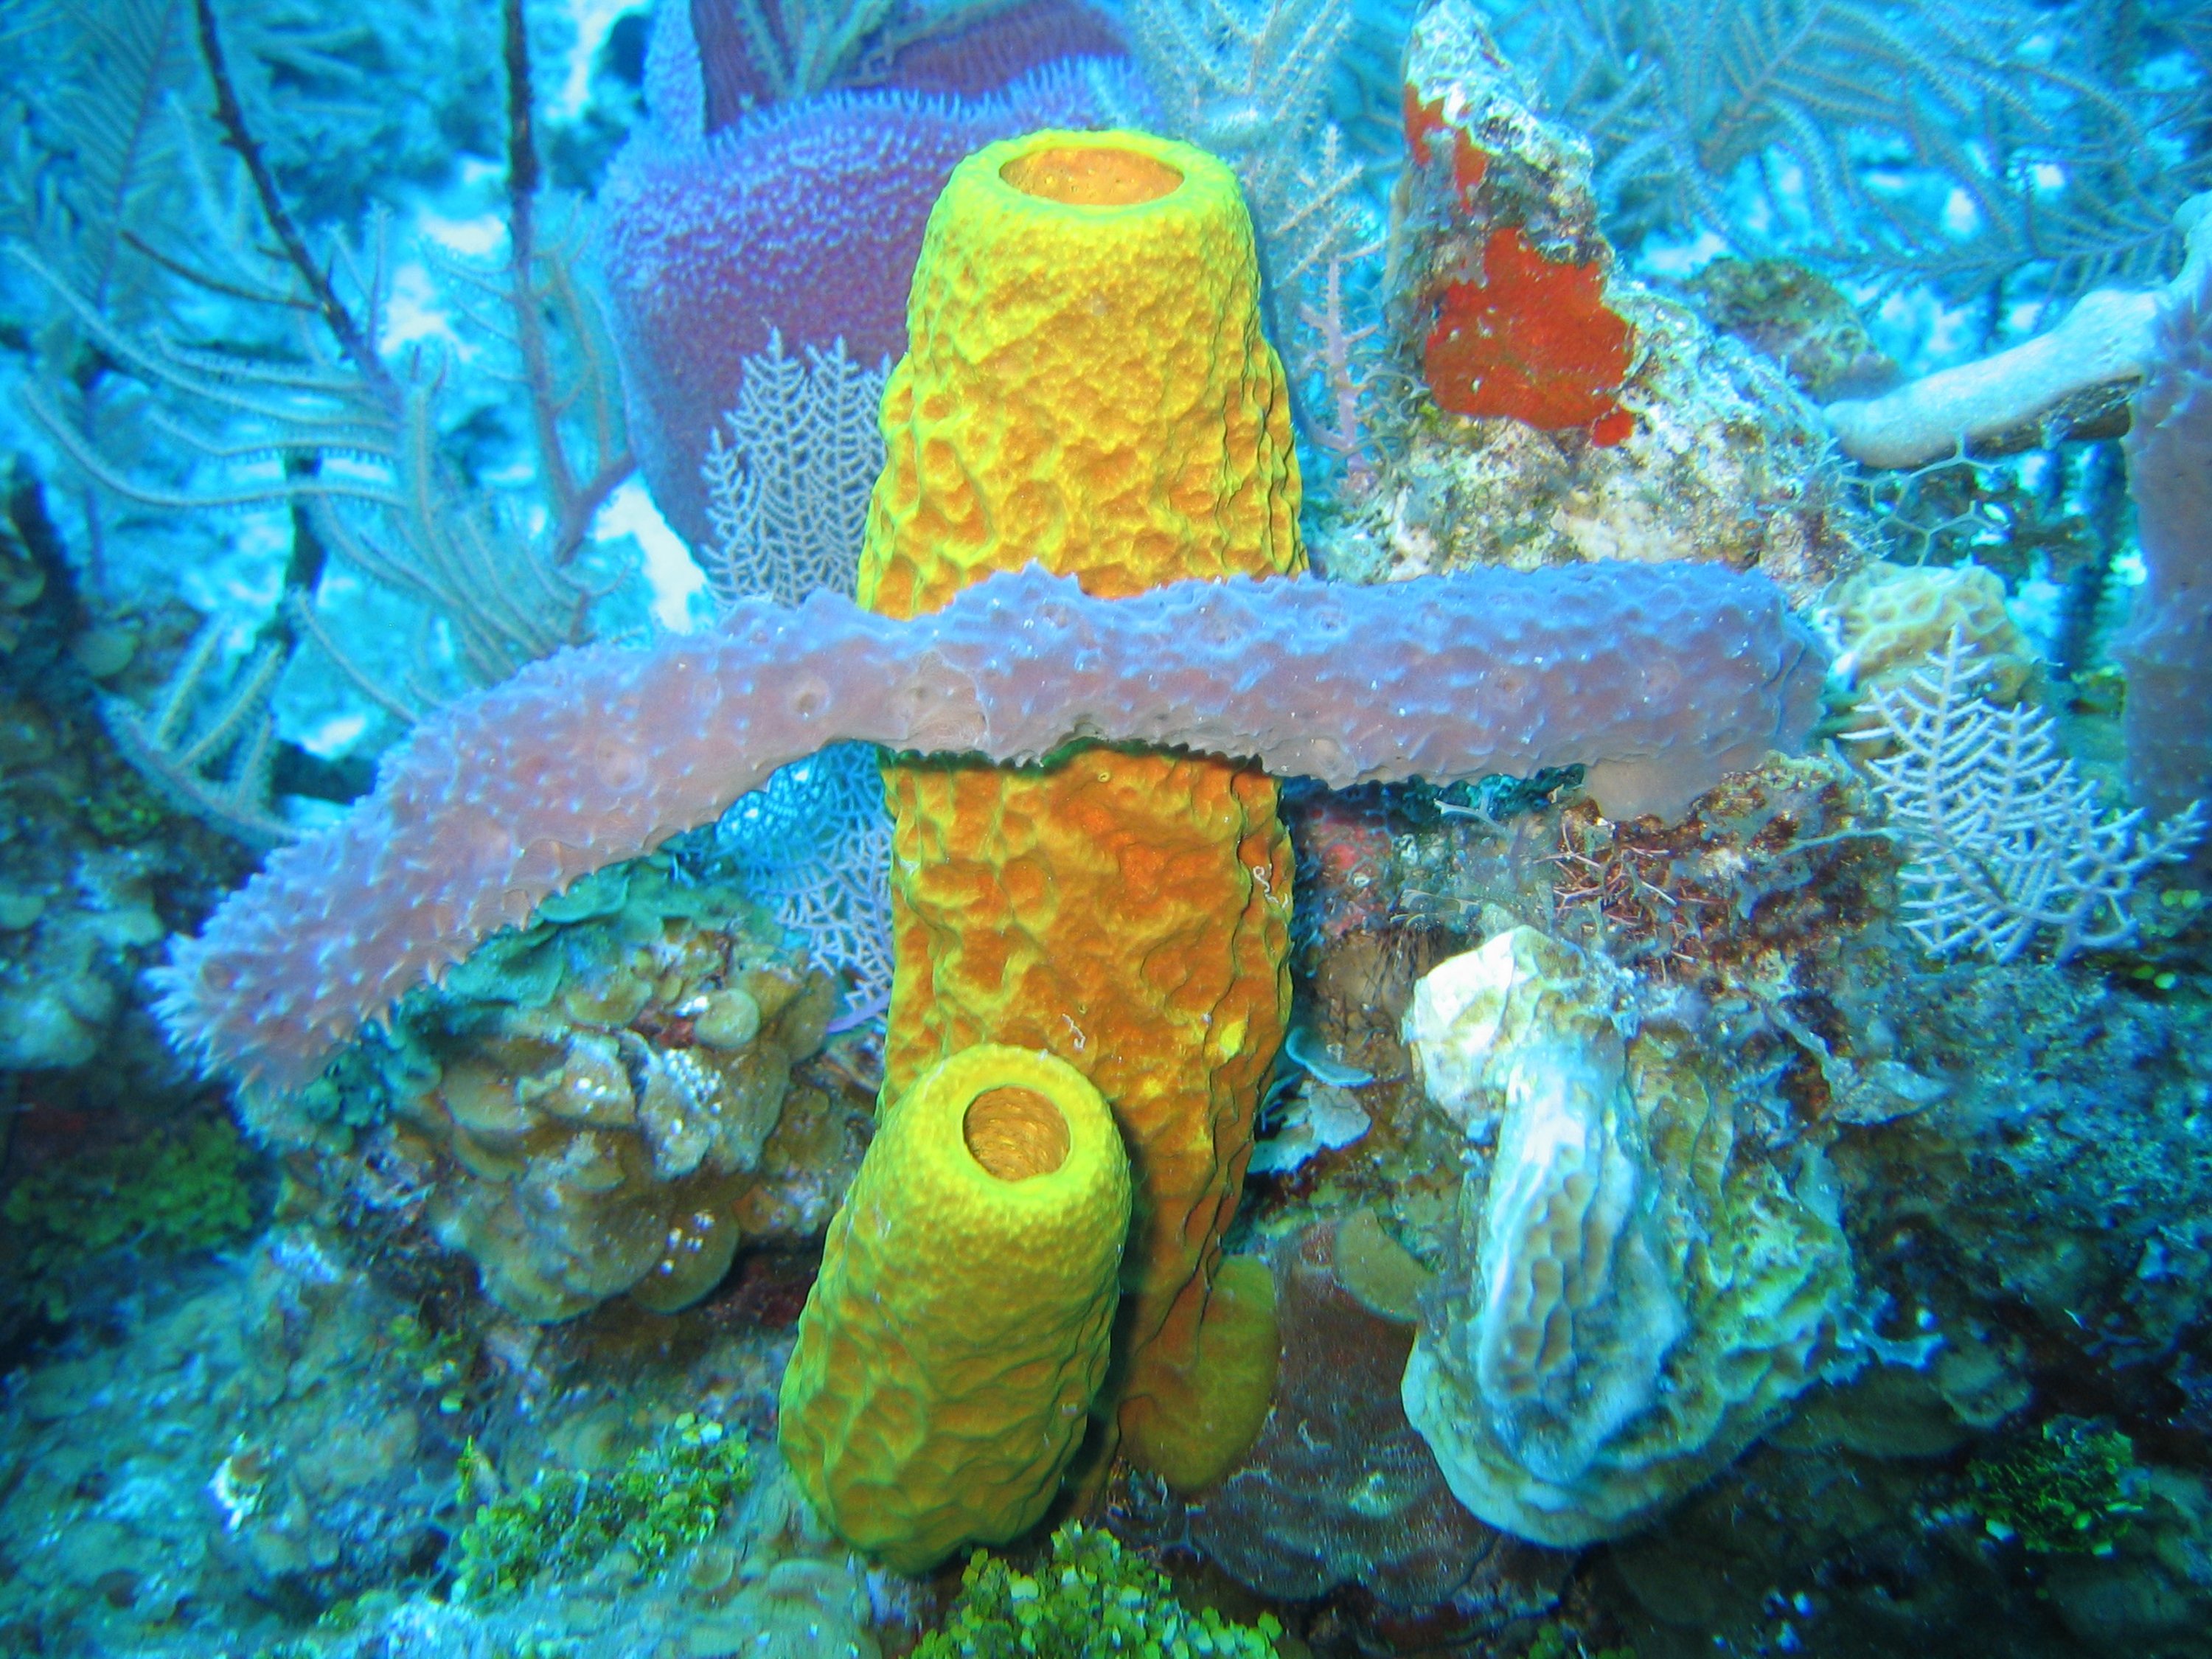 Sponge biodiversity and morphotypes at the lip of a wall site in 60 feet (20 m) of water. Included are the yellow tube sponge, Aplysina fistularis, the purple vase sponge, Niphates digitalis, the red encrusting sponge, Spirastrella coccinea [nl], and the gray rope sponge, Callyspongia sp.